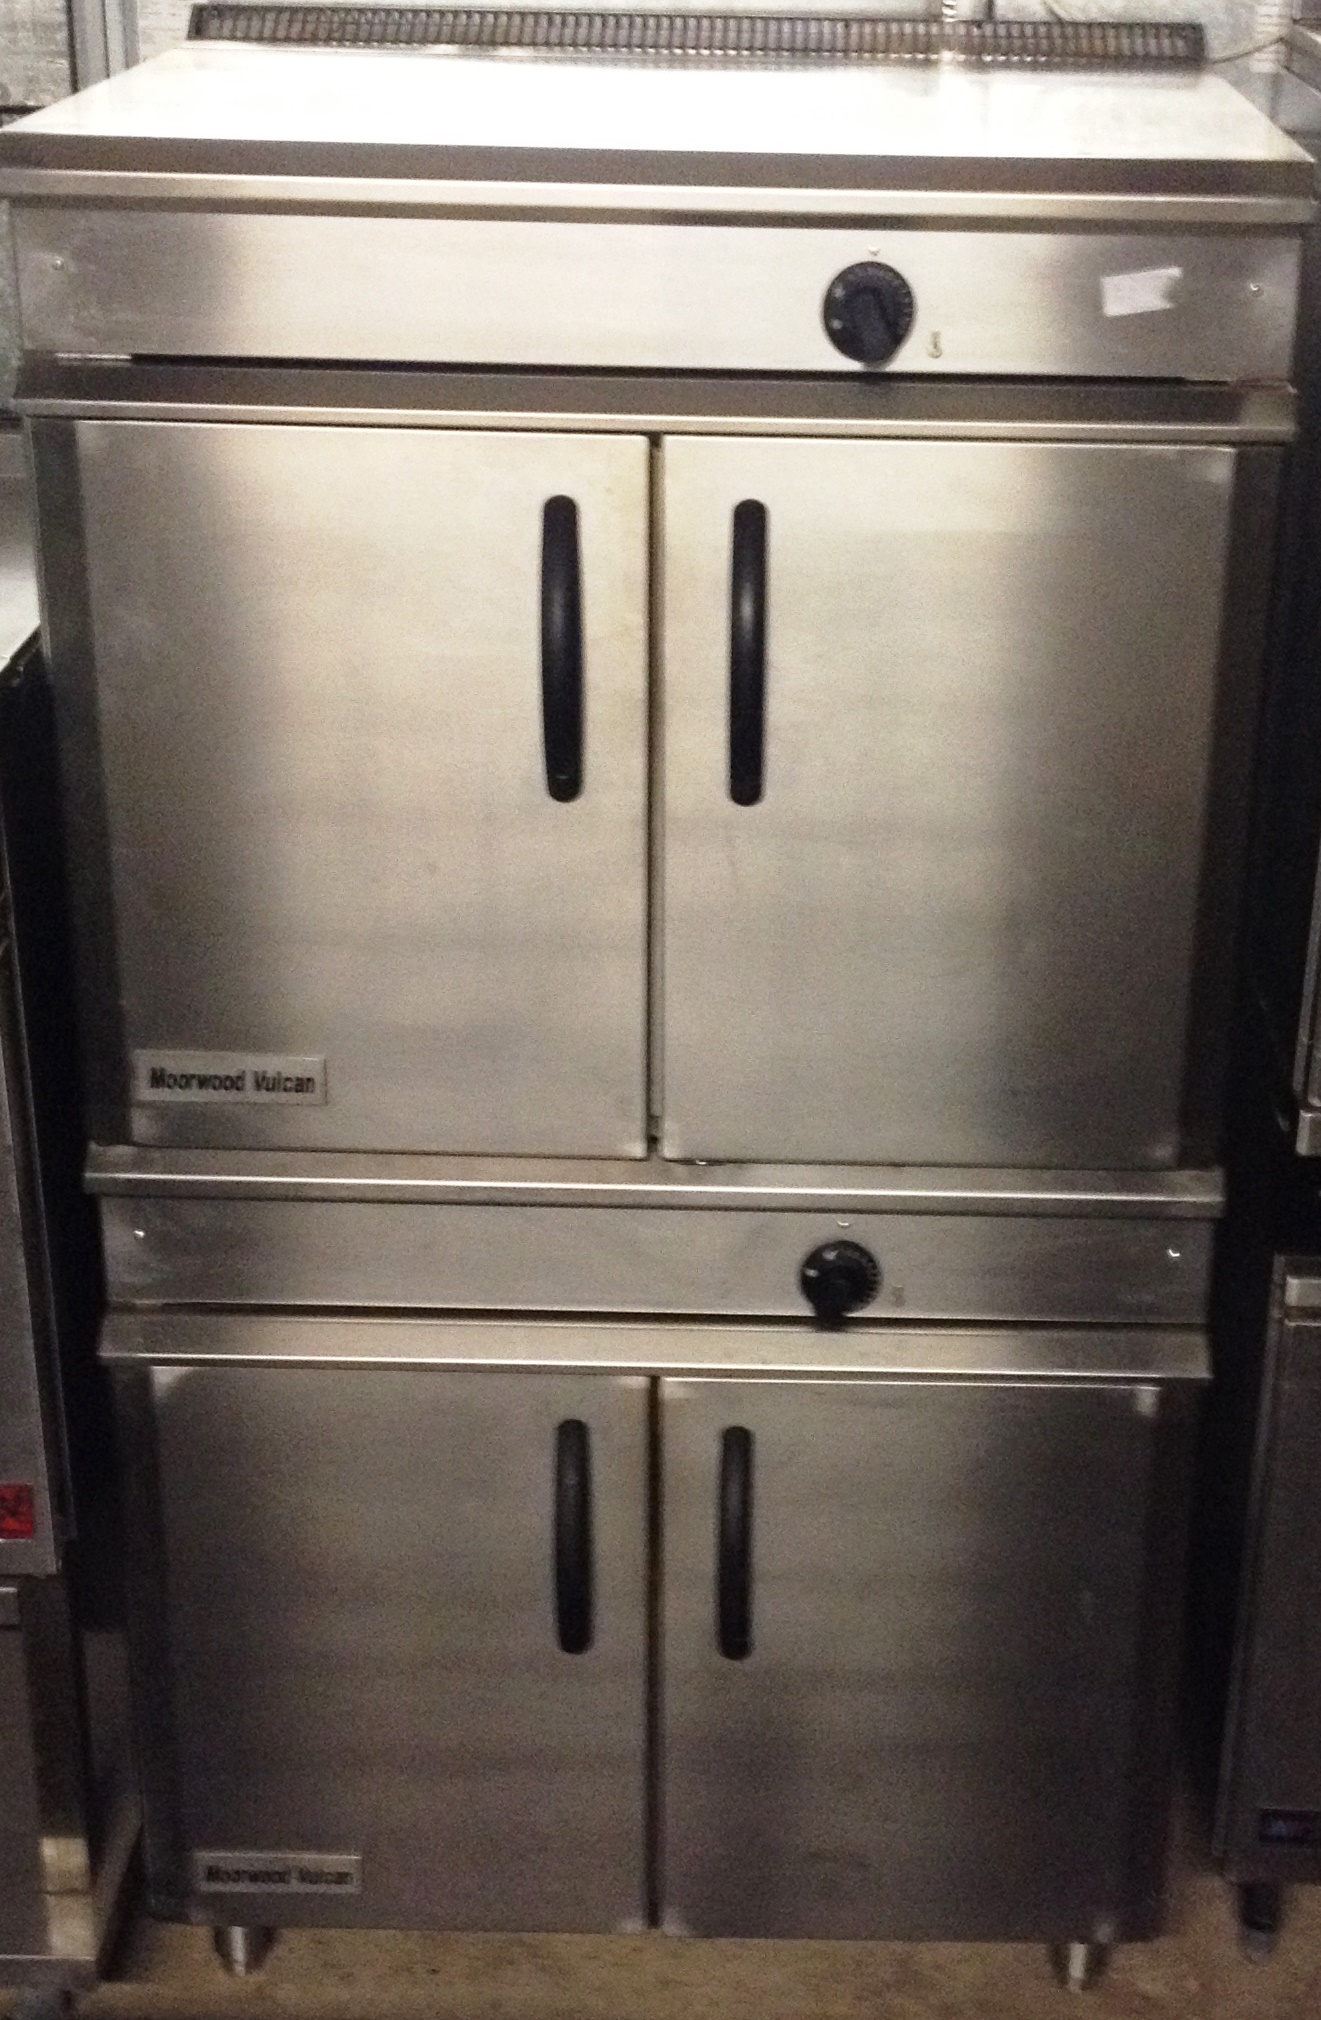 MOORWOOD VULCAN Twin Stacked Gas Utility Ovens – CLEARANCE ITEM